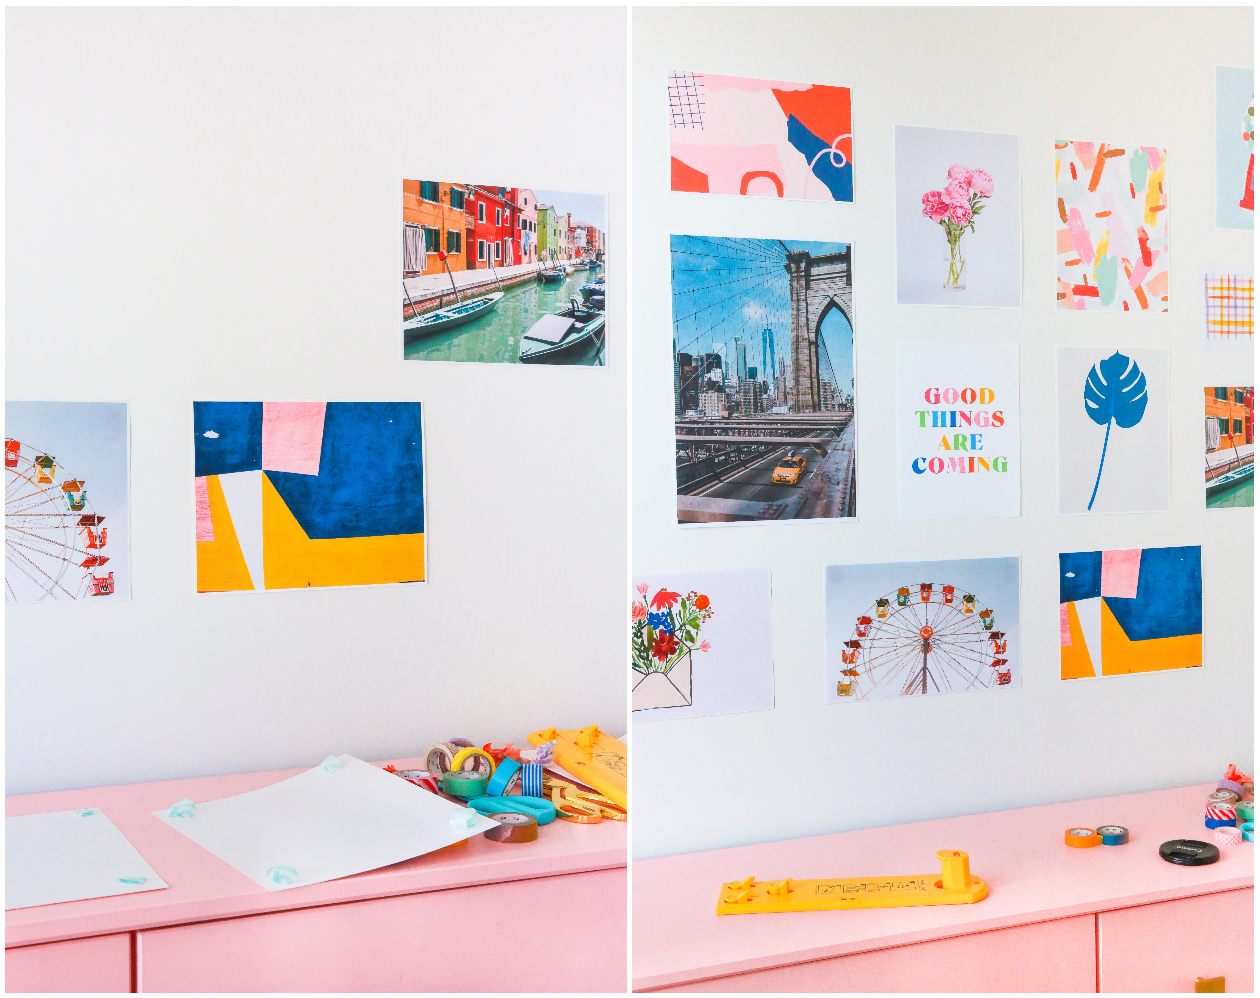 DIY Washi Tape Gallery Wall (made with Free Printable Art)